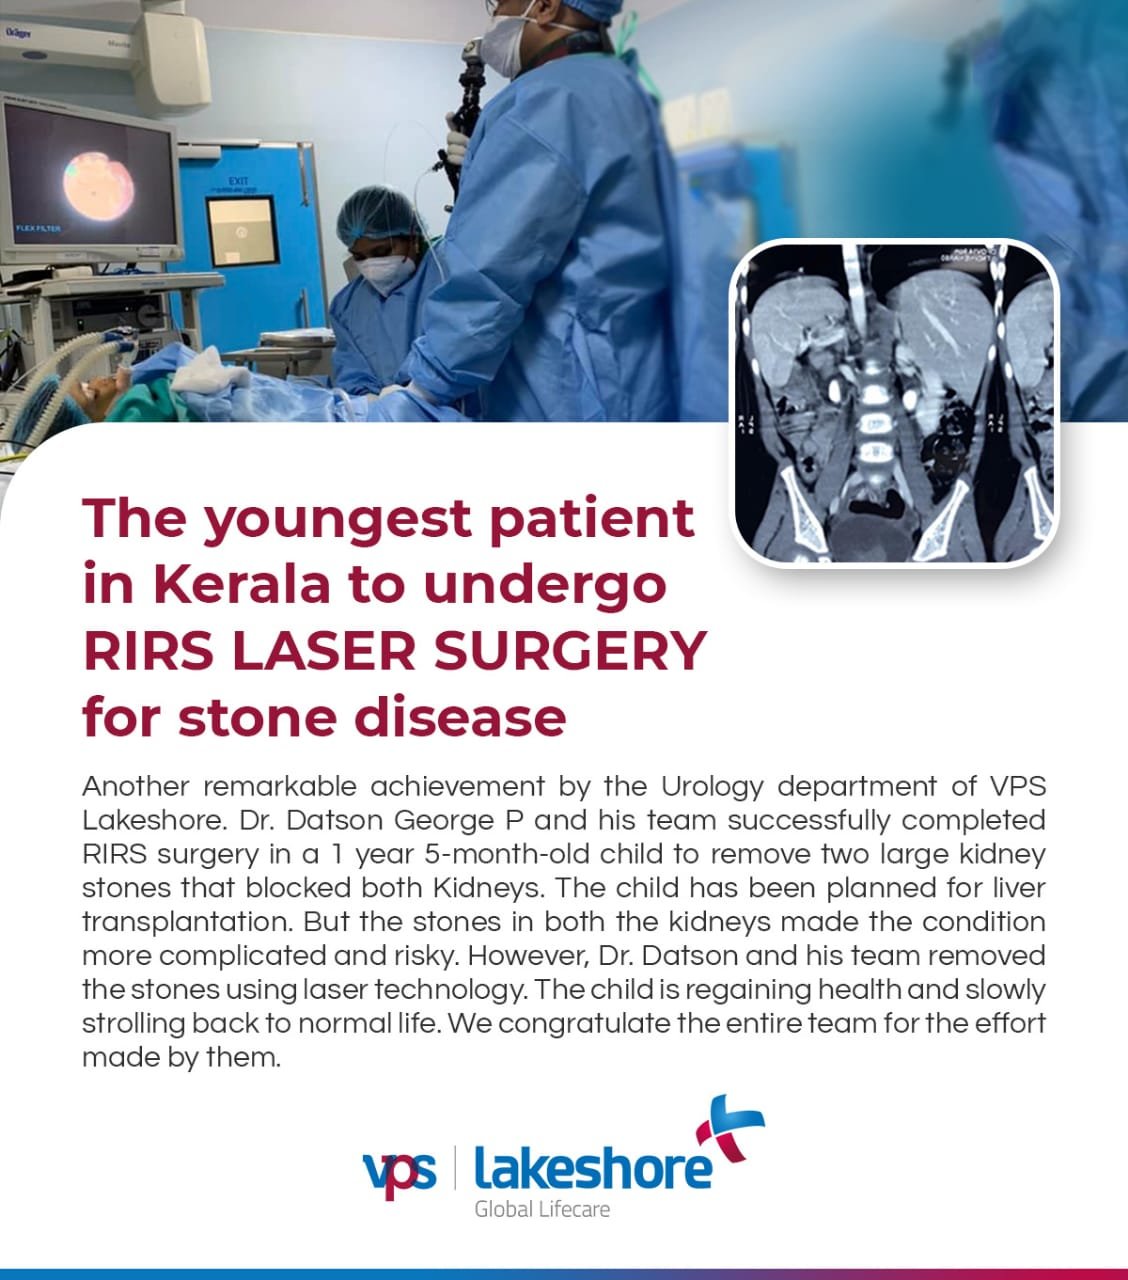 Another remarkable achievement by the Urology department of VPS Lakeshore.